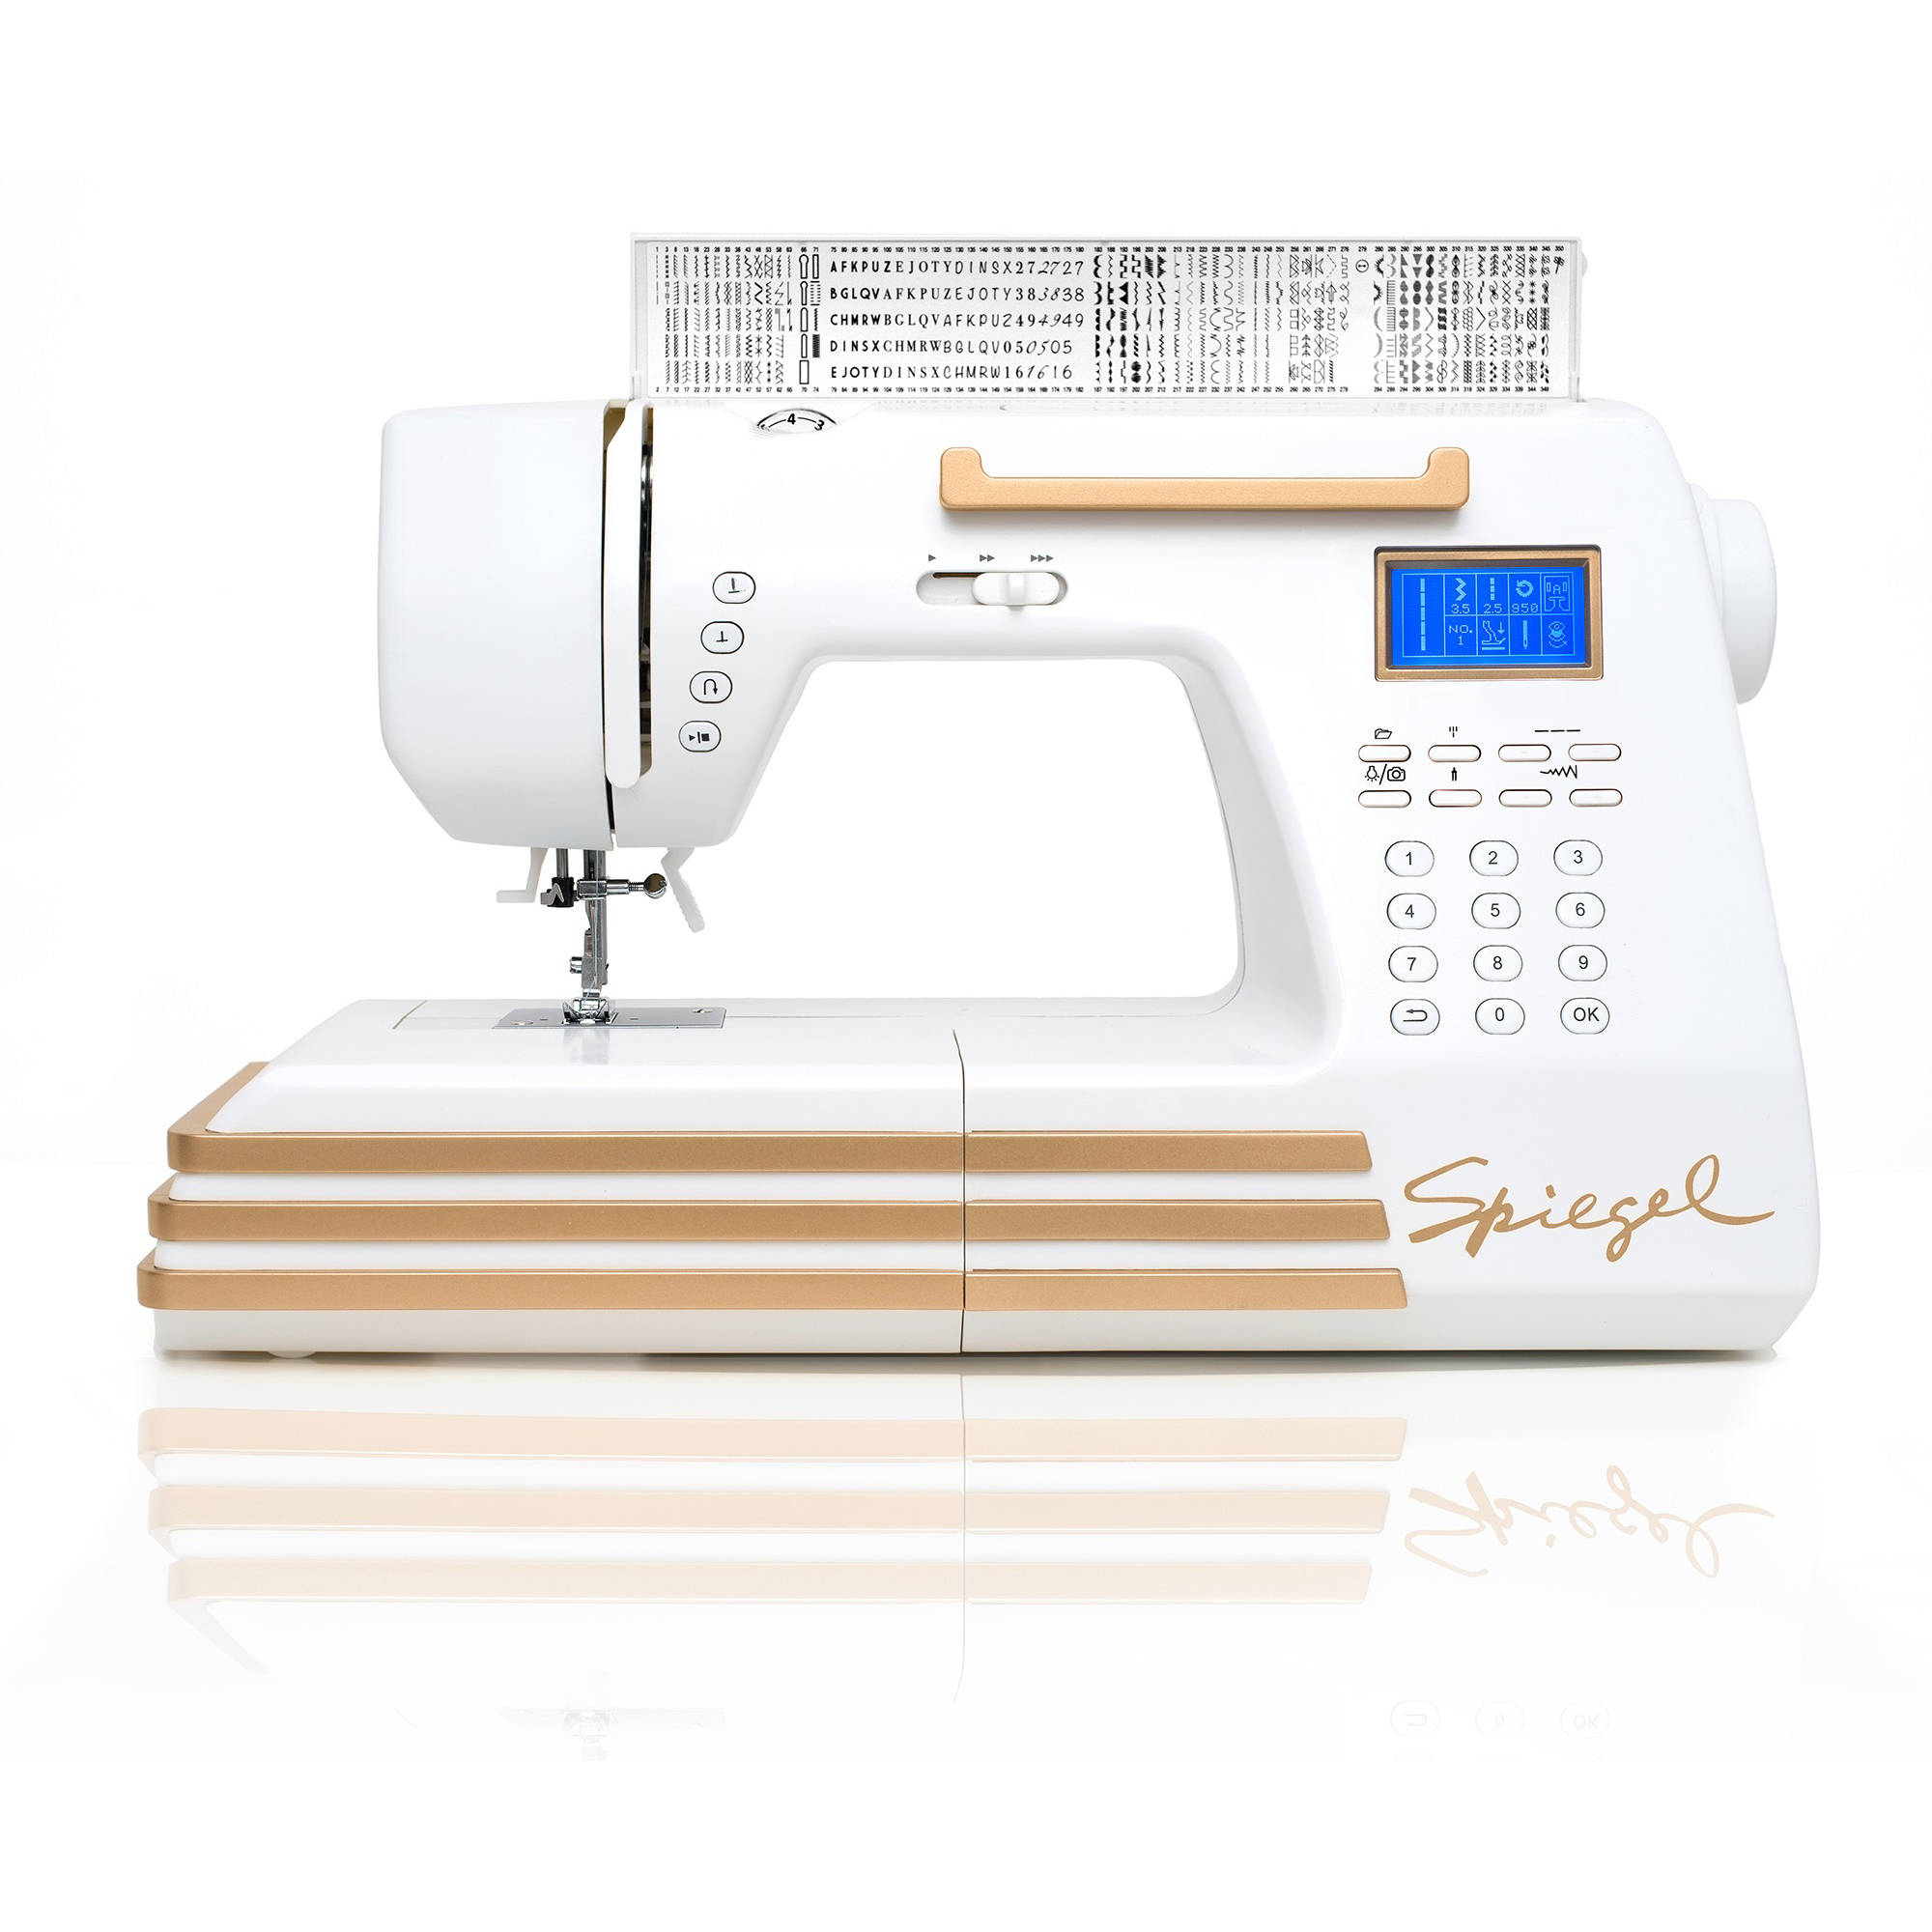 Spiegel 60609 Computerized Sewing Machine - image 2 of 6